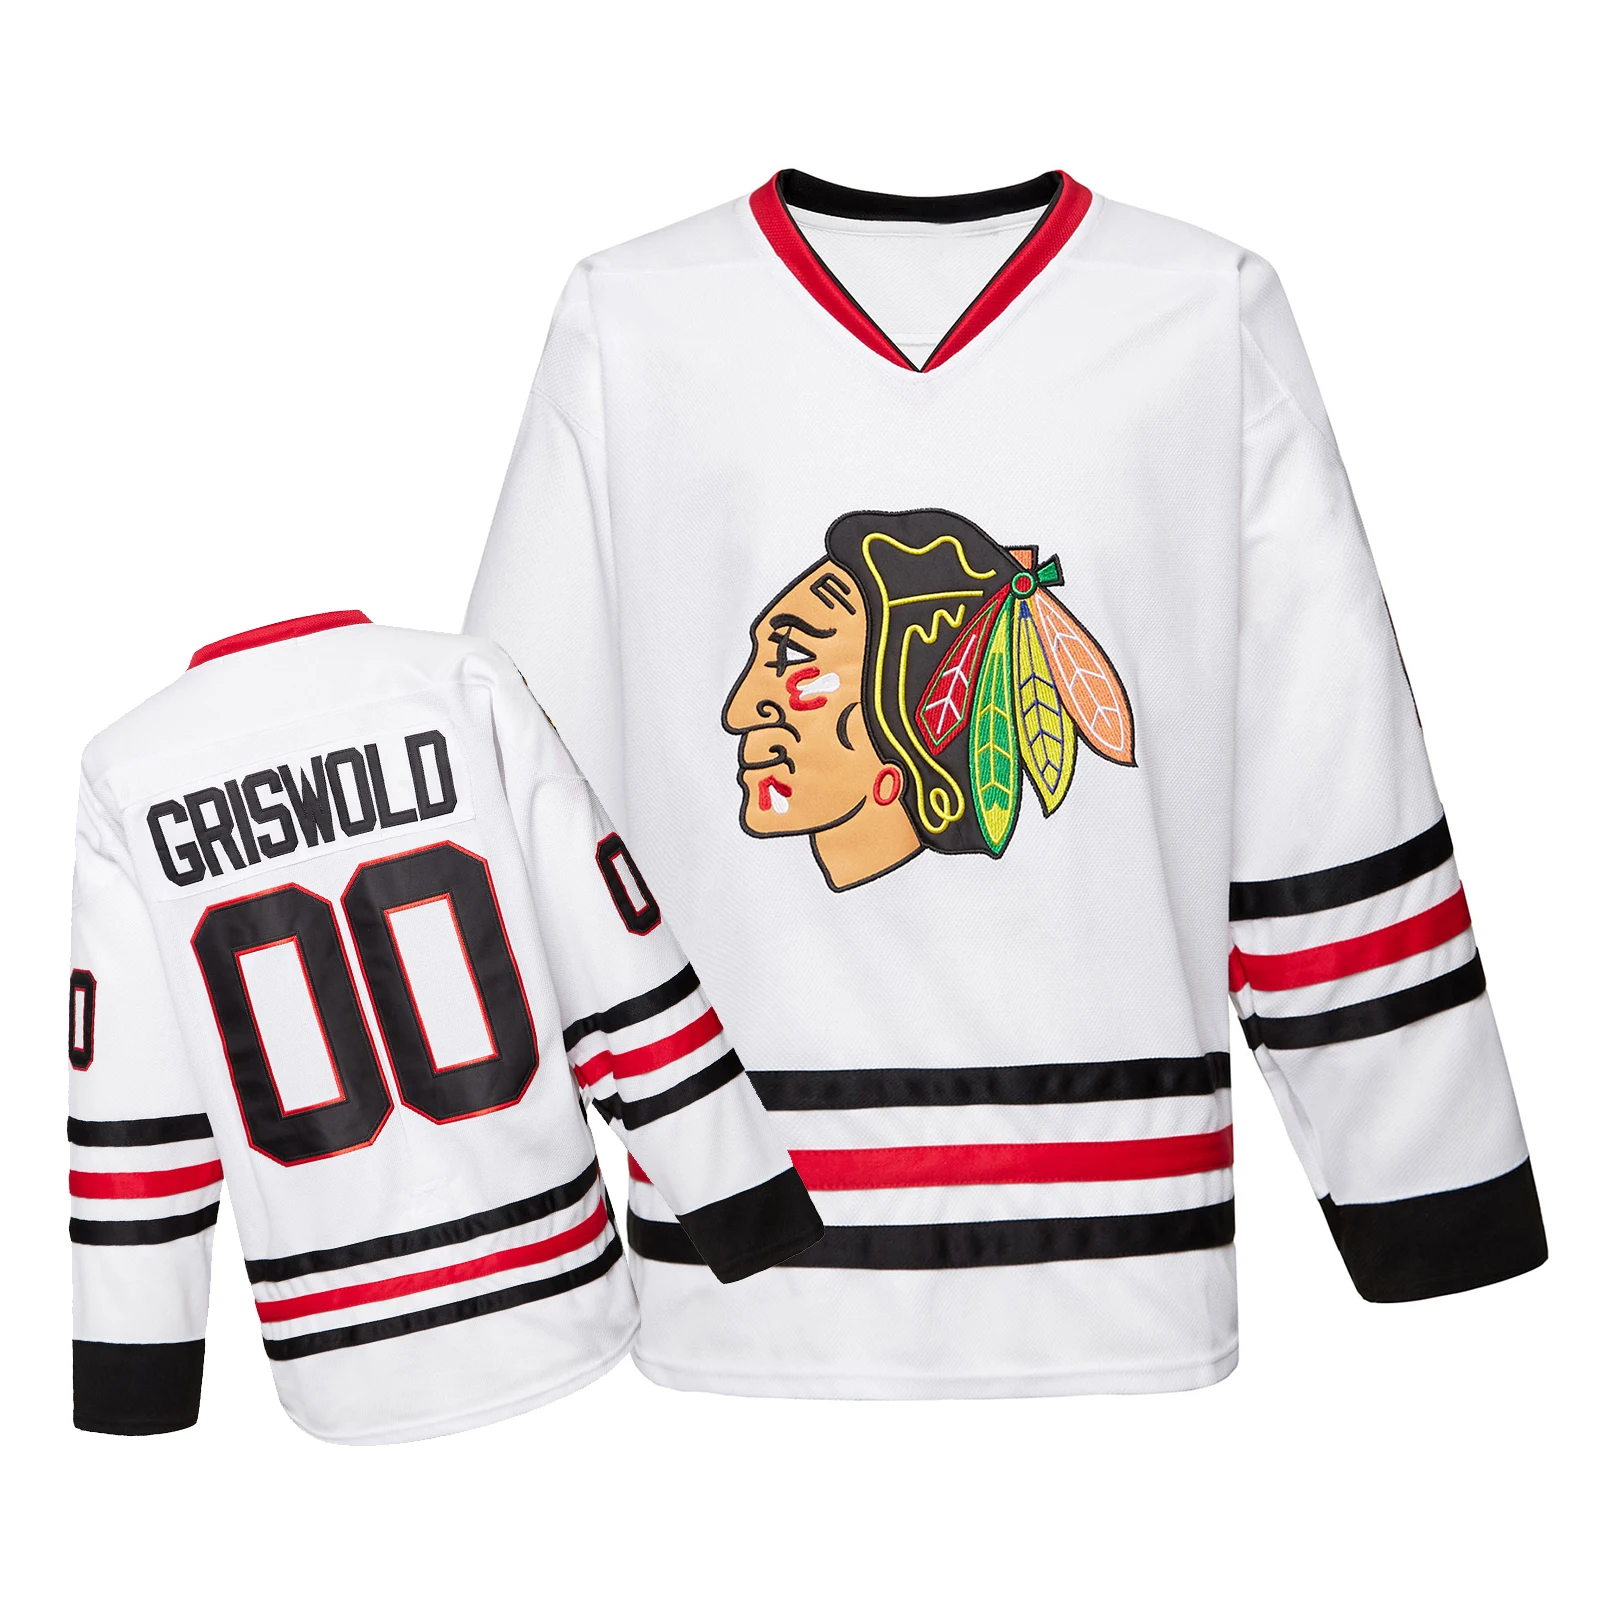 Buy Clark Griswold #00 Ice Hockey Jersey for X-Mas Christrmas Vacation  Stitched Movie,Ice Hockey Jersey for Men White at